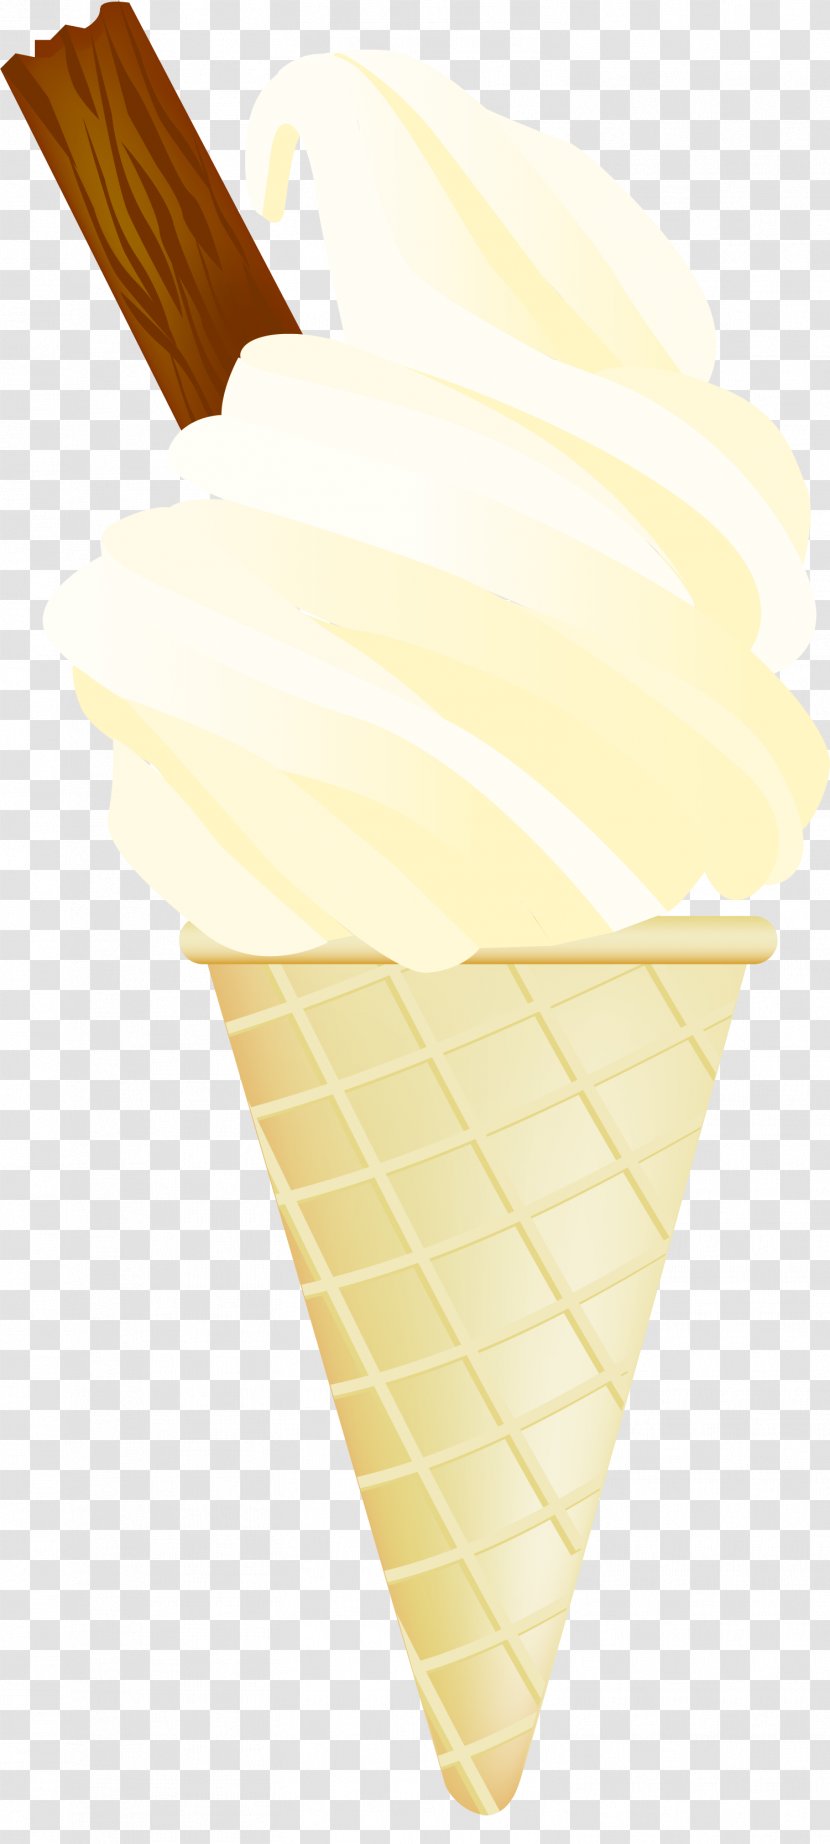 Ice Cream Cones 99 Flake Illustration - Food - Hand Painted Yellow Chocolate Transparent PNG